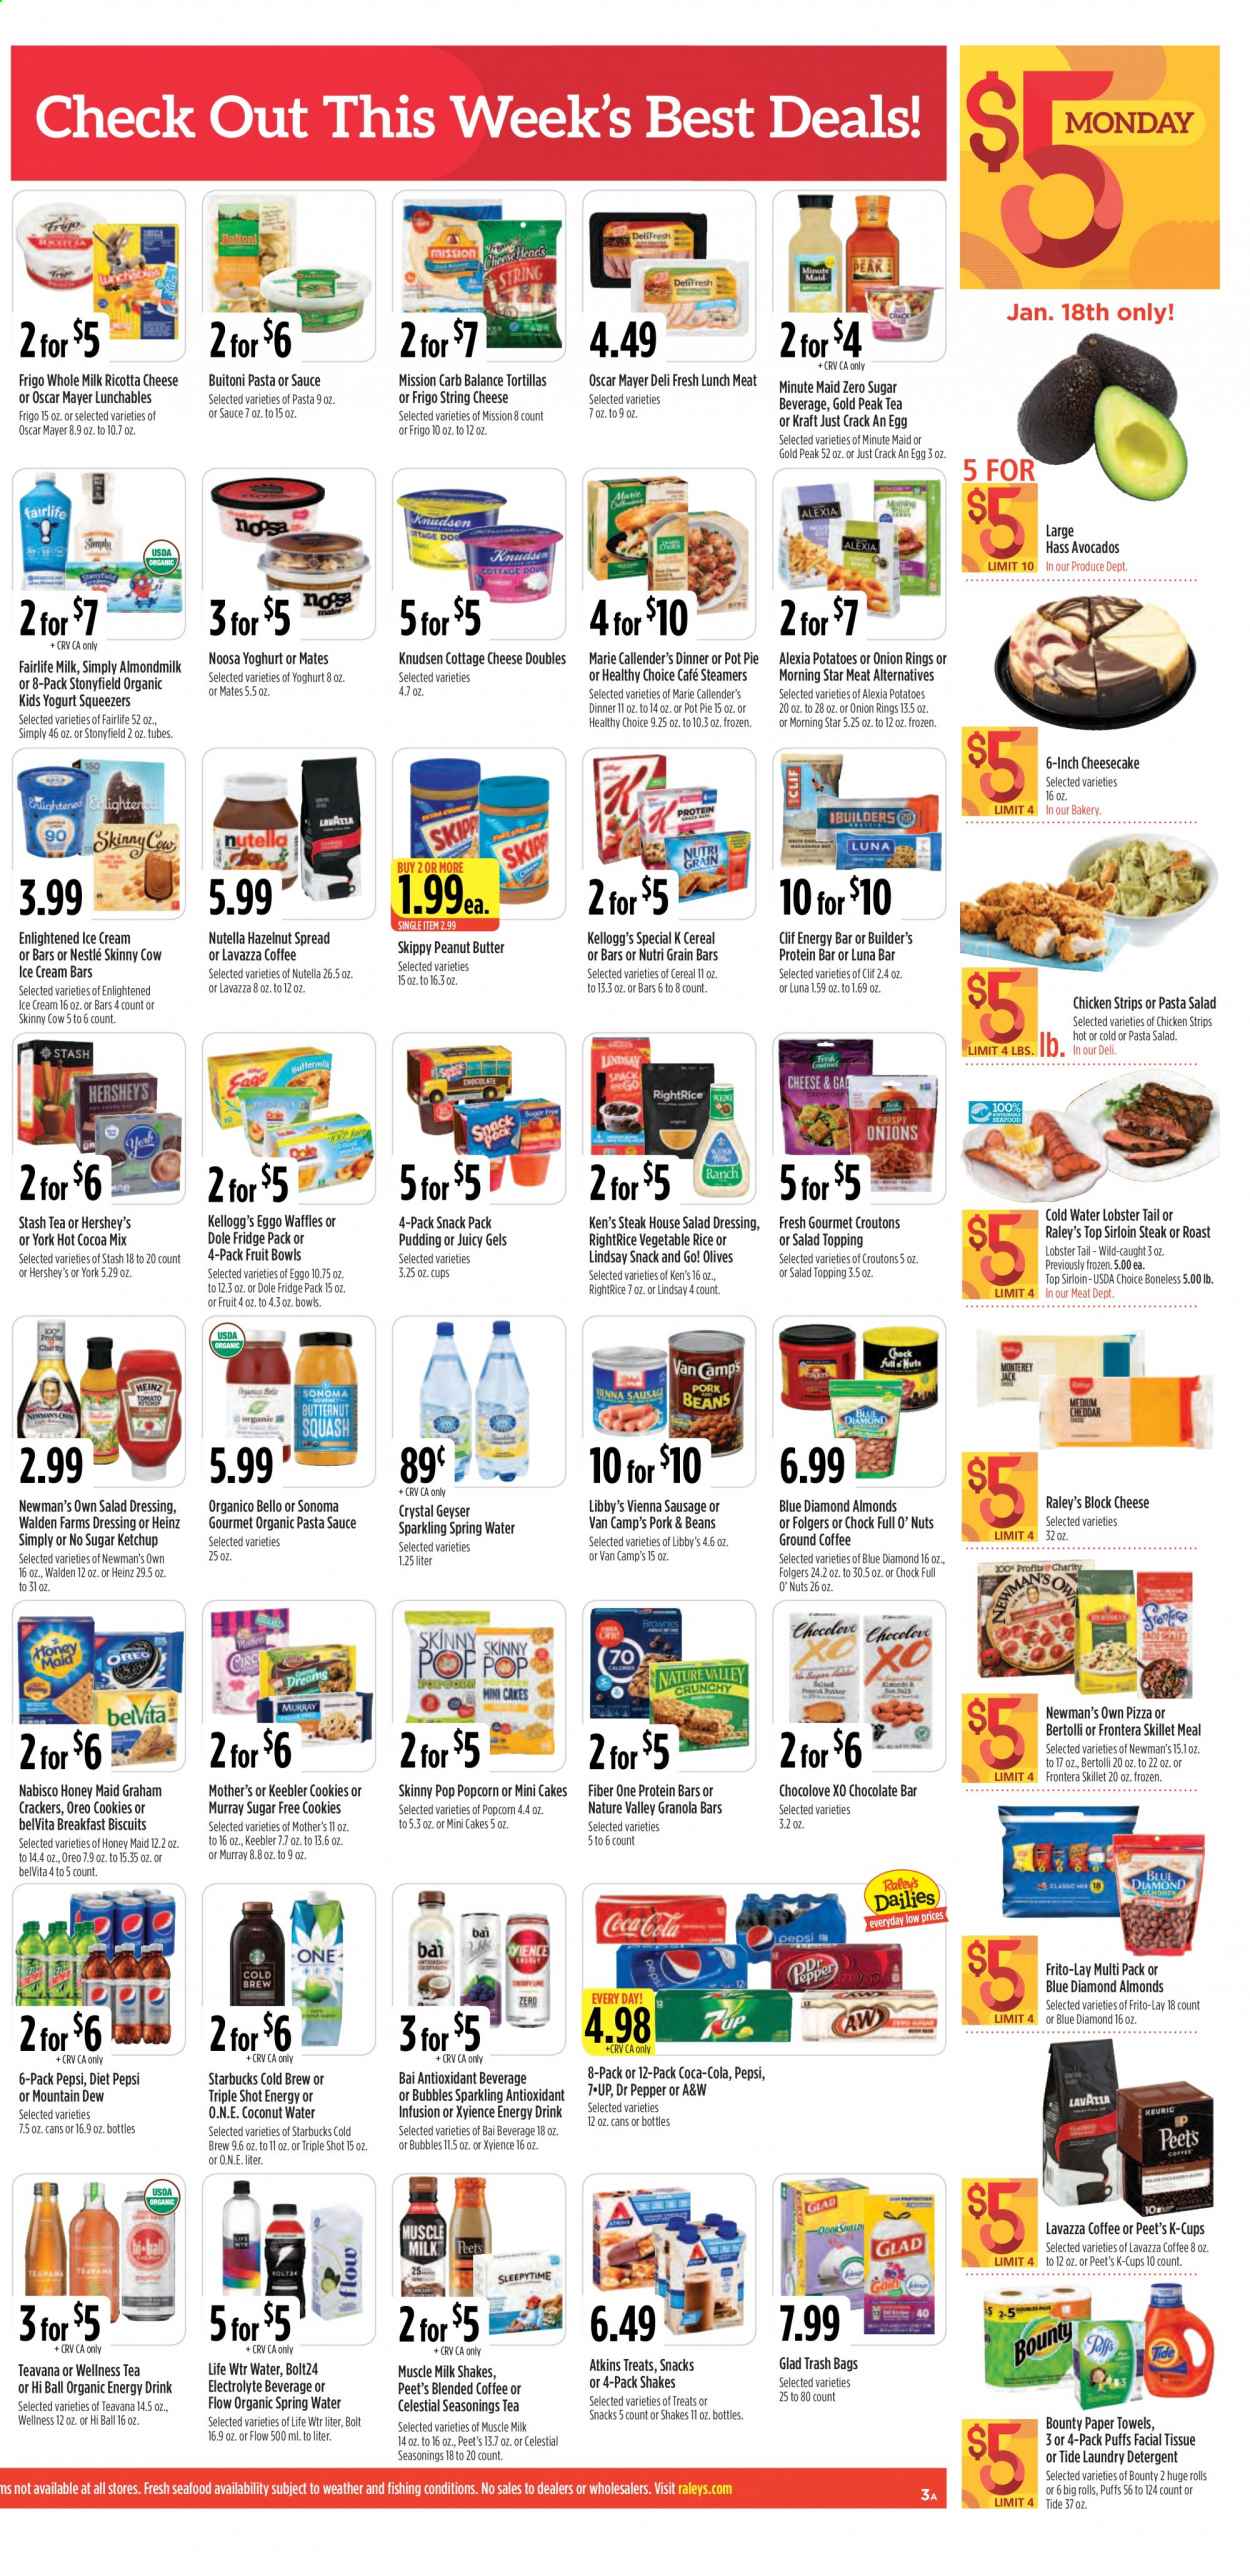 thumbnail - Raley's Flyer - 01/13/2021 - 01/19/2021 - Sales products - Miller Lite, Coors, Michelob, Dole, bread, tortillas, cupcake, pot pie, puffs, cheesecake, cake, pie, lobster, salmon, salmon fillet, seafood, crab, lobster tail, shrimps, Jack Daniel's, pizza, onion rings, soup, hamburger, meatloaf, Healthy Choice, Marie Callender's, Lunchables, Kraft®, Bertolli, Buitoni, bacon, ham, ham shank, Oscar Mayer, sausage, vienna sausage, macaroni salad, pasta salad, lunch meat, cottage cheese, ricotta, string cheese, pudding, Oreo, yoghurt, almond milk, milk, shake, muscle milk, ice cream, ice cream bars, Hershey's, Enlightened lce Cream, beans, strips, chicken strips, cookies, graham crackers, Nestlé, Nutella, chocolate, Bounty, crackers, Kellogg's, biscuit, Keebler, croutons, popcorn, Frito-Lay, Skinny Pop, topping, Heinz, olives, cereals, protein bar, granola bar, belVita, Honey Maid, Nature Valley, Fiber One, Nutri-Grain, dill, salad dressing, ketchup, pasta sauce, dressing, peanut butter, hazelnut spread, Blue Diamond, Coca-Cola, Mountain Dew, Pepsi, energy drink, Dr. Pepper, Diet Pepsi, coconut water, 7UP, A&W, Gold Peak Tea, Bai, seltzer water, spring water, hot cocoa, tea, coffee, Starbucks, Folgers, ground coffee, coffee capsules, K-Cups, Lavazza, Sauvignon Blanc, canadian whisky, gin, Smirnoff, tequila, vodka, whiskey, irish whiskey, Rémy Martin, whisky, beer, Bud Light, IPA, Firestone Walker, ground turkey, beef meat, beef sirloin, steak, sirloin steak, chuck roast, burger patties, pork loin, pork meat, tissues, kitchen towels, paper towels, detergent, Tide, laundry detergent, rose, Go!, avocado. Page 3.